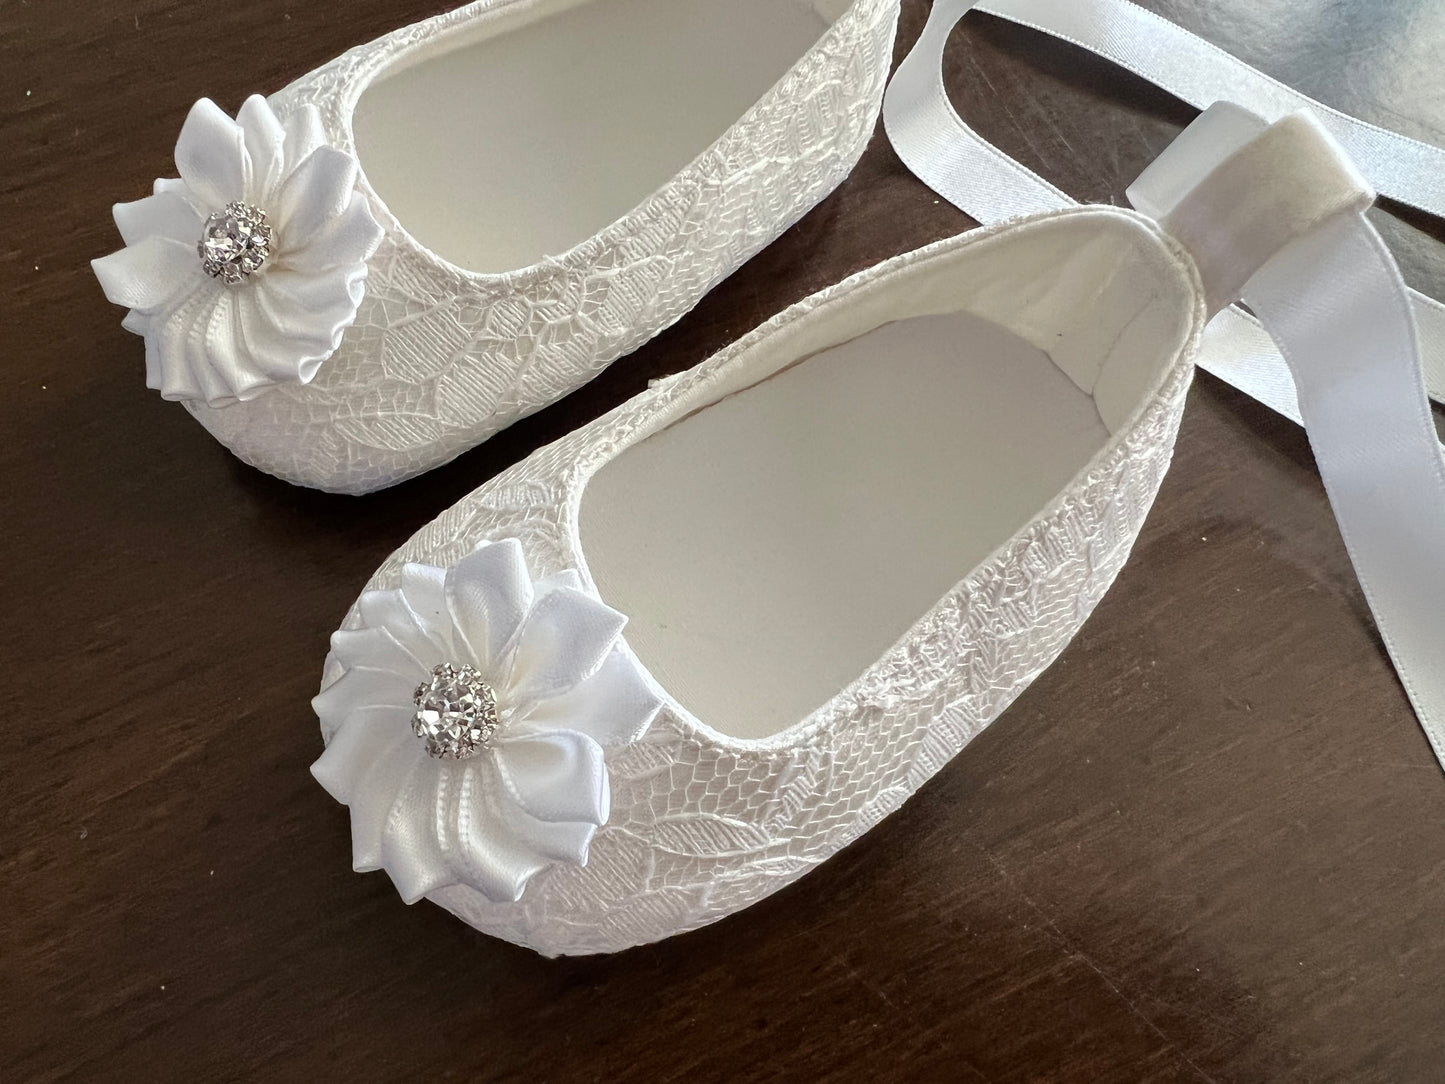 White Baptism Shoes with Flowers and Rhinestones